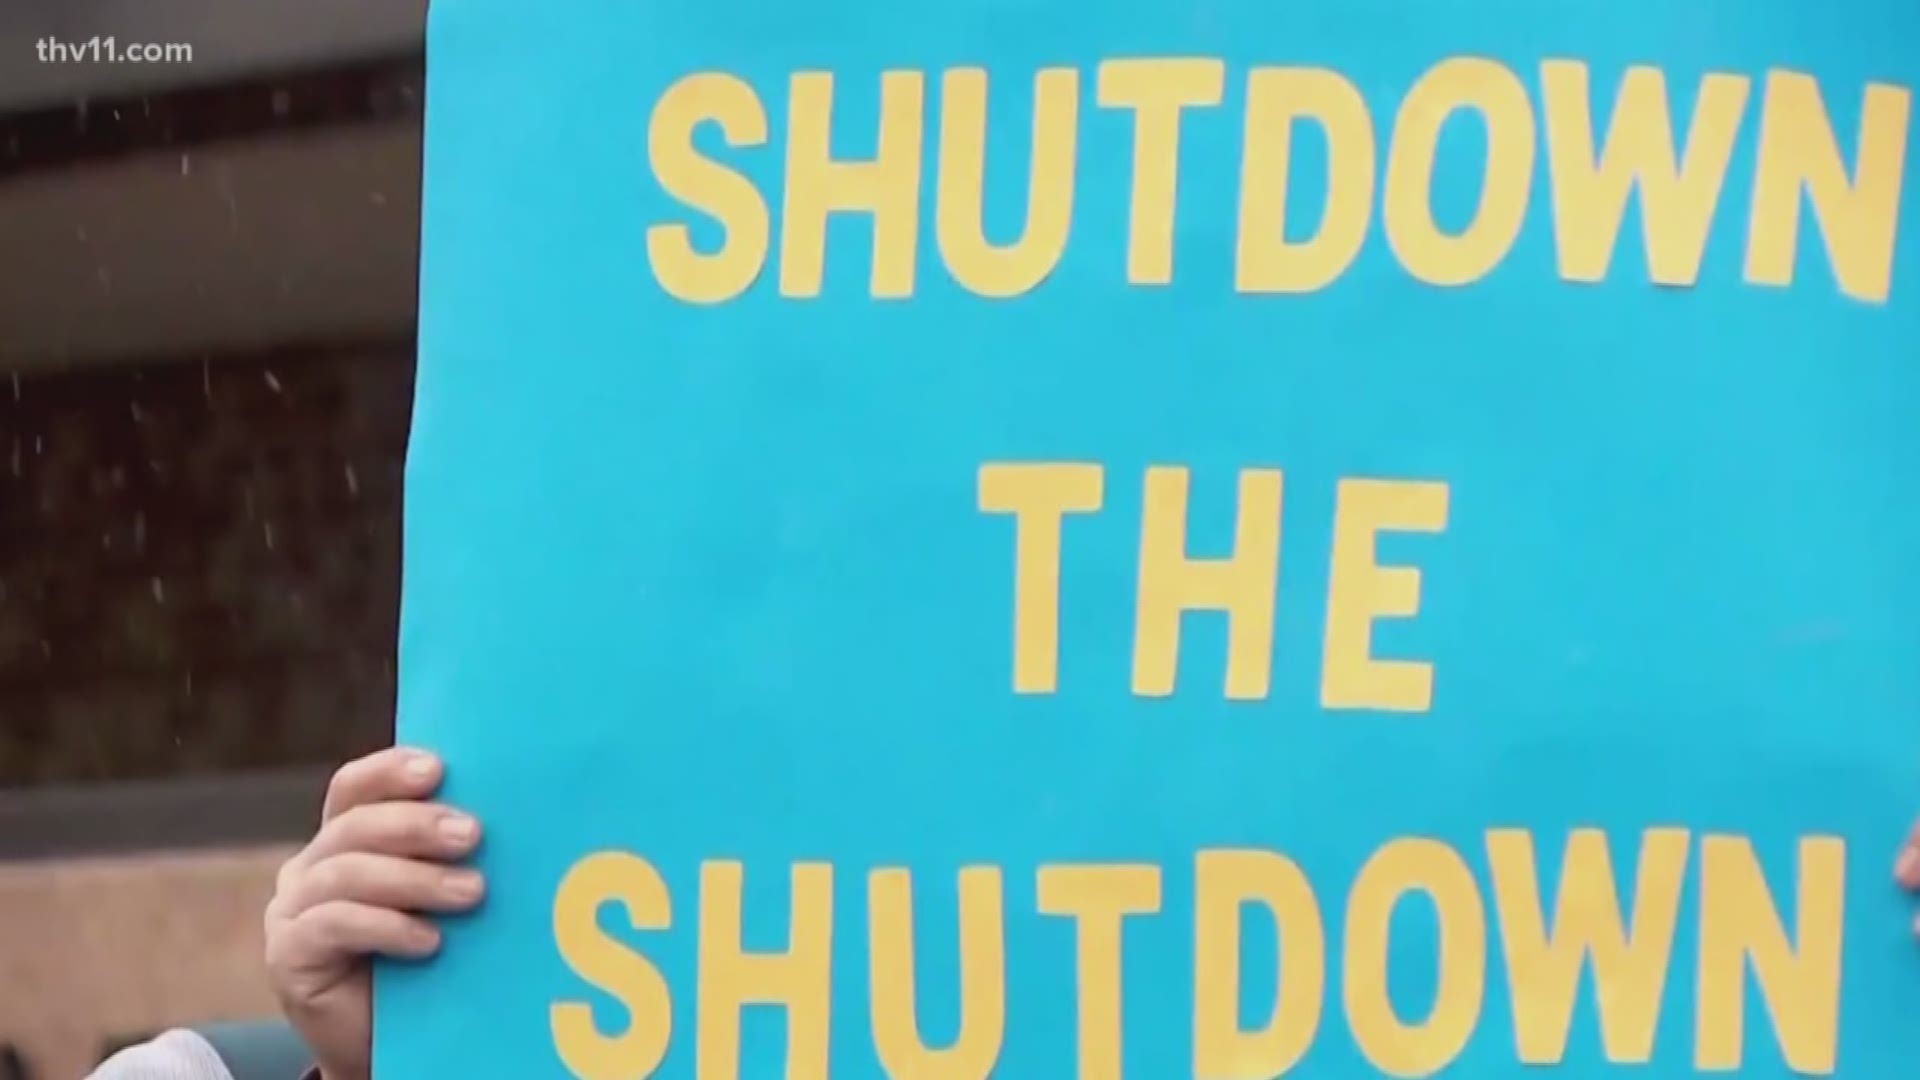 The government shut down is on hold, but that doesn't mean the ripple effects are over.